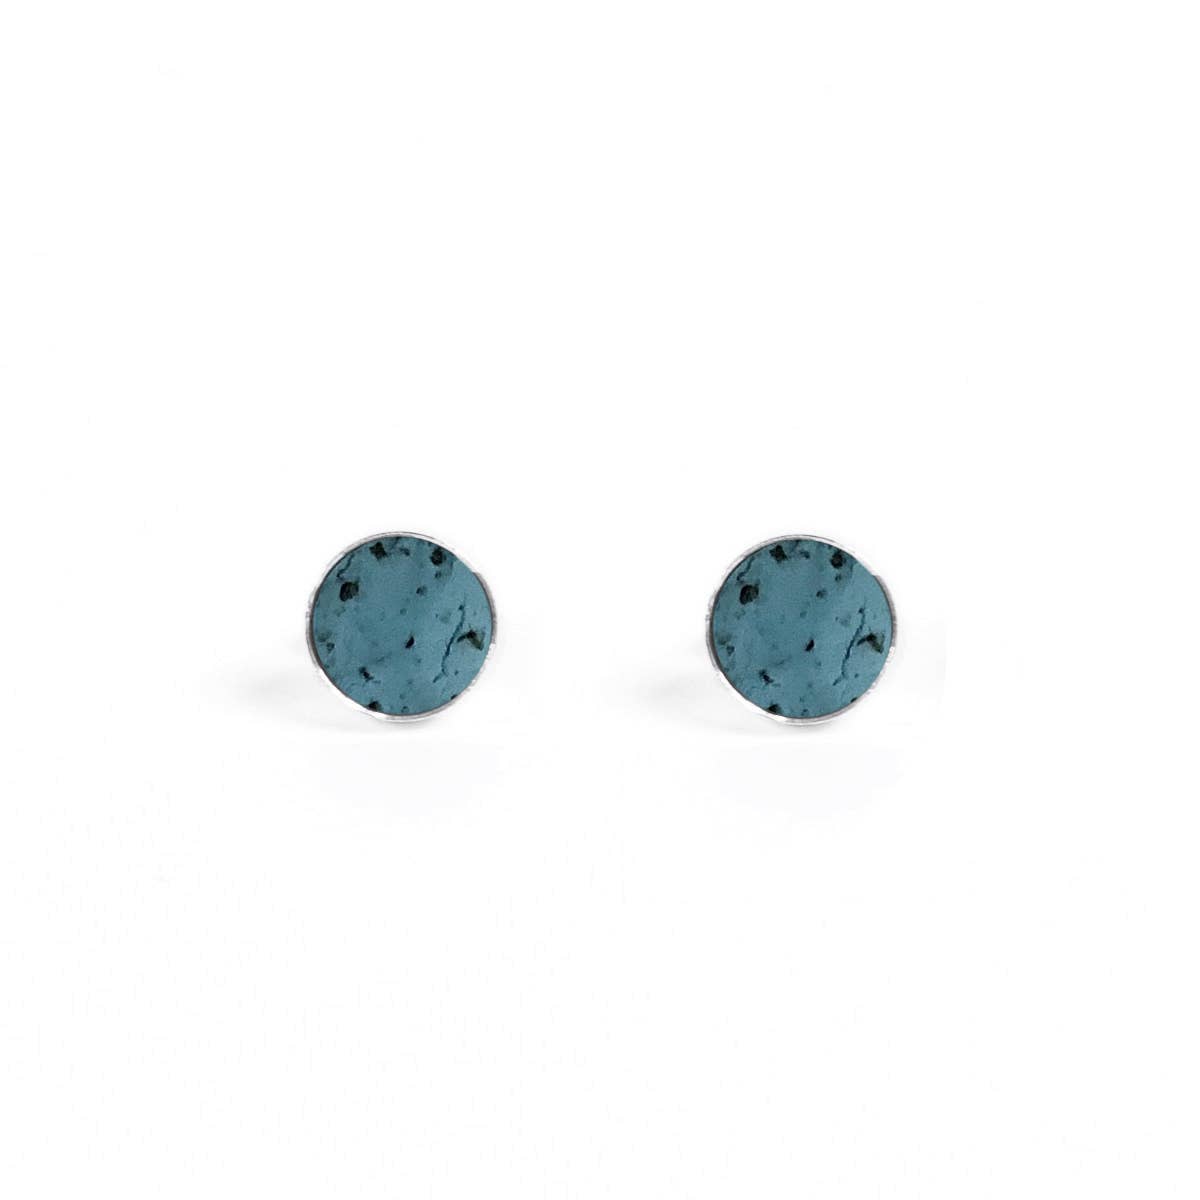 Inlay Solitaire Studs: Small / Sandstone